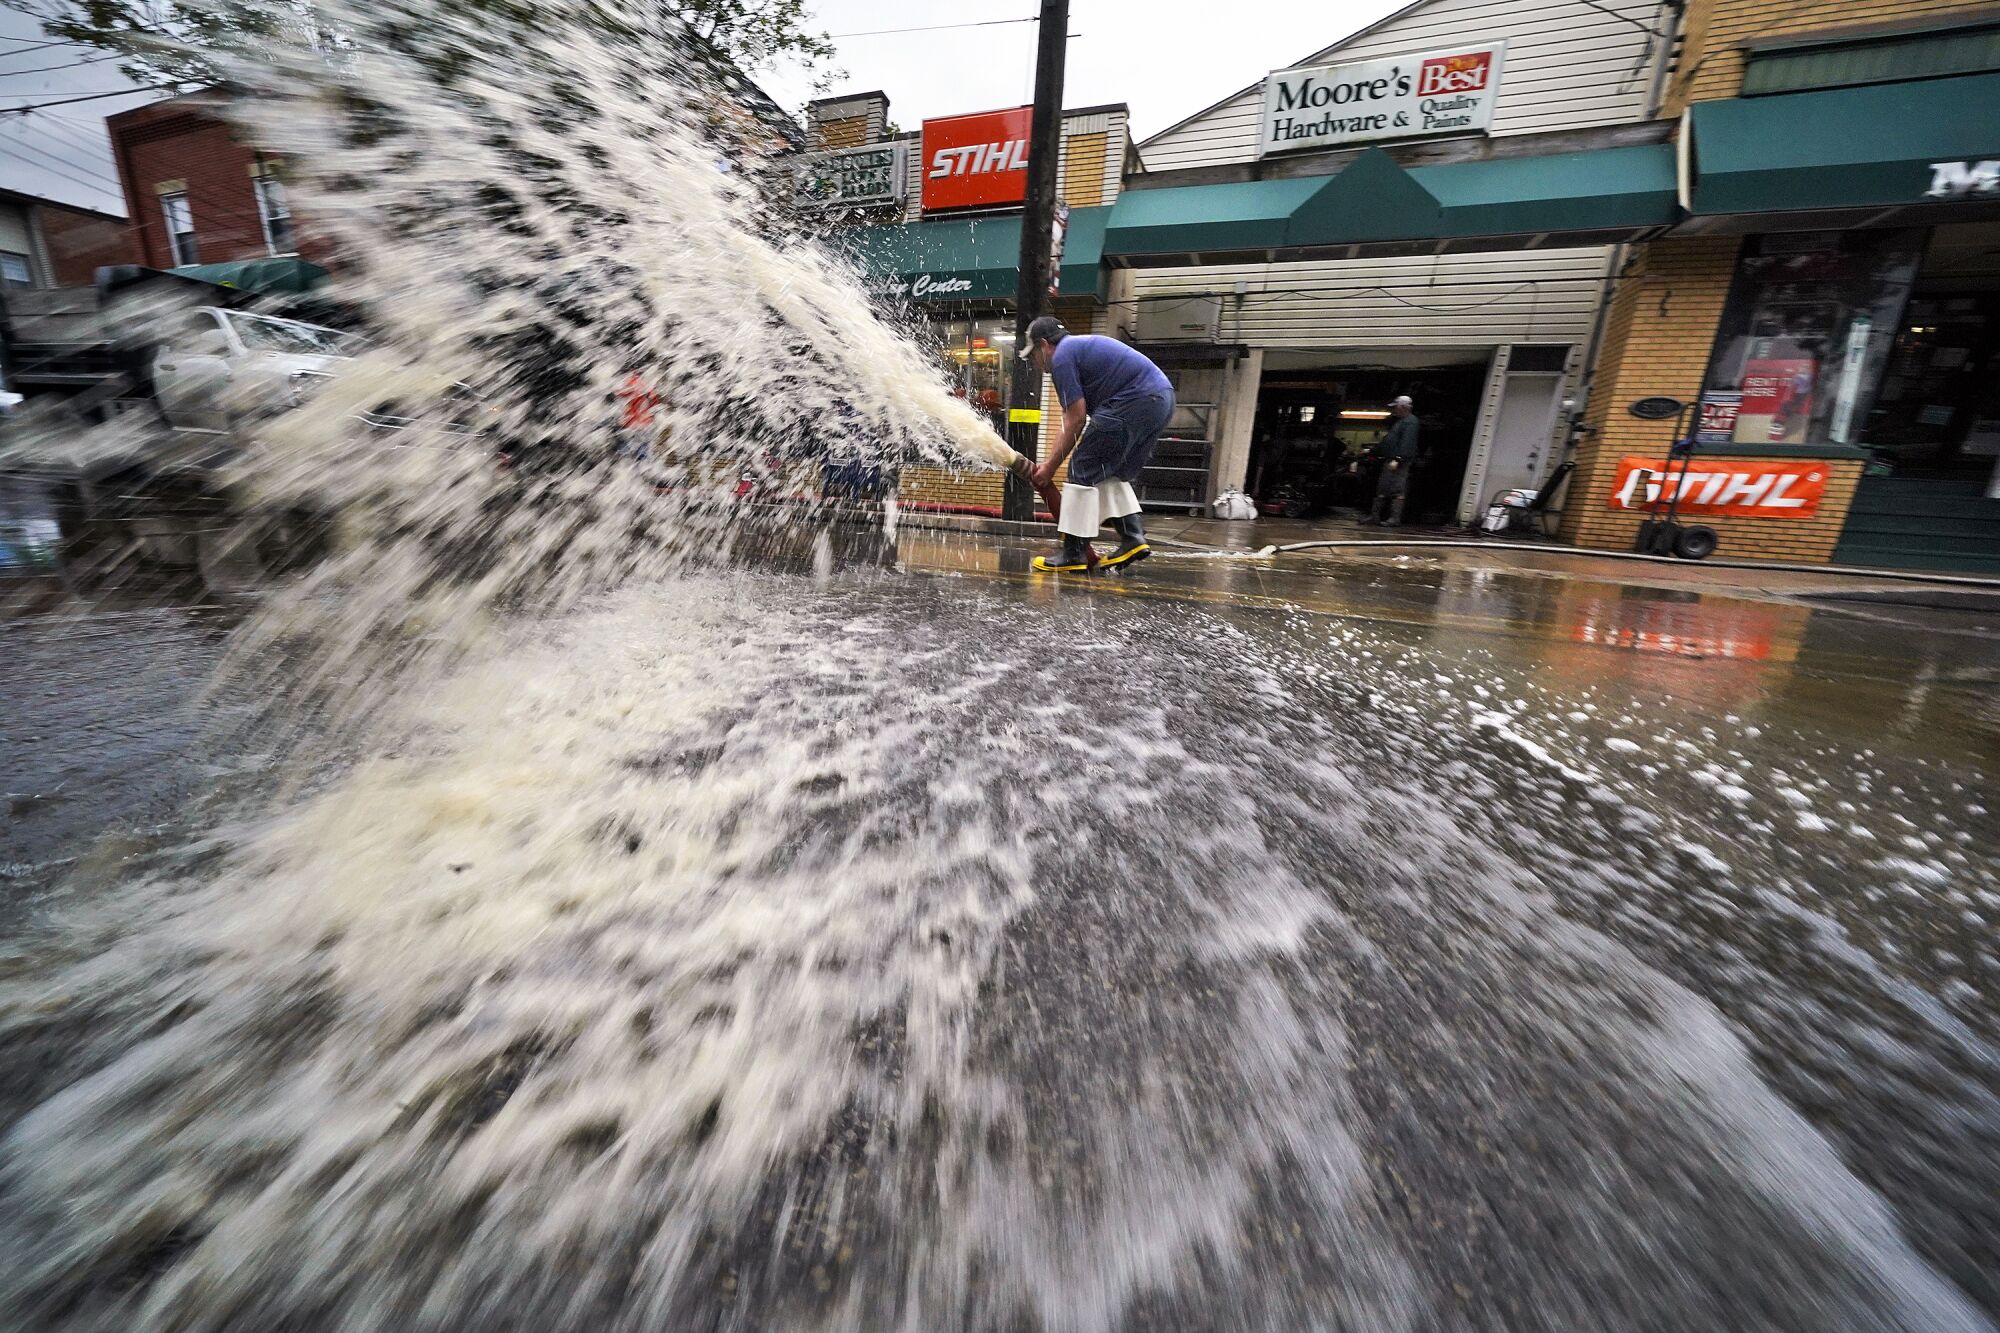 Water sprays dramatically from a pump on a street outside a hardware store.